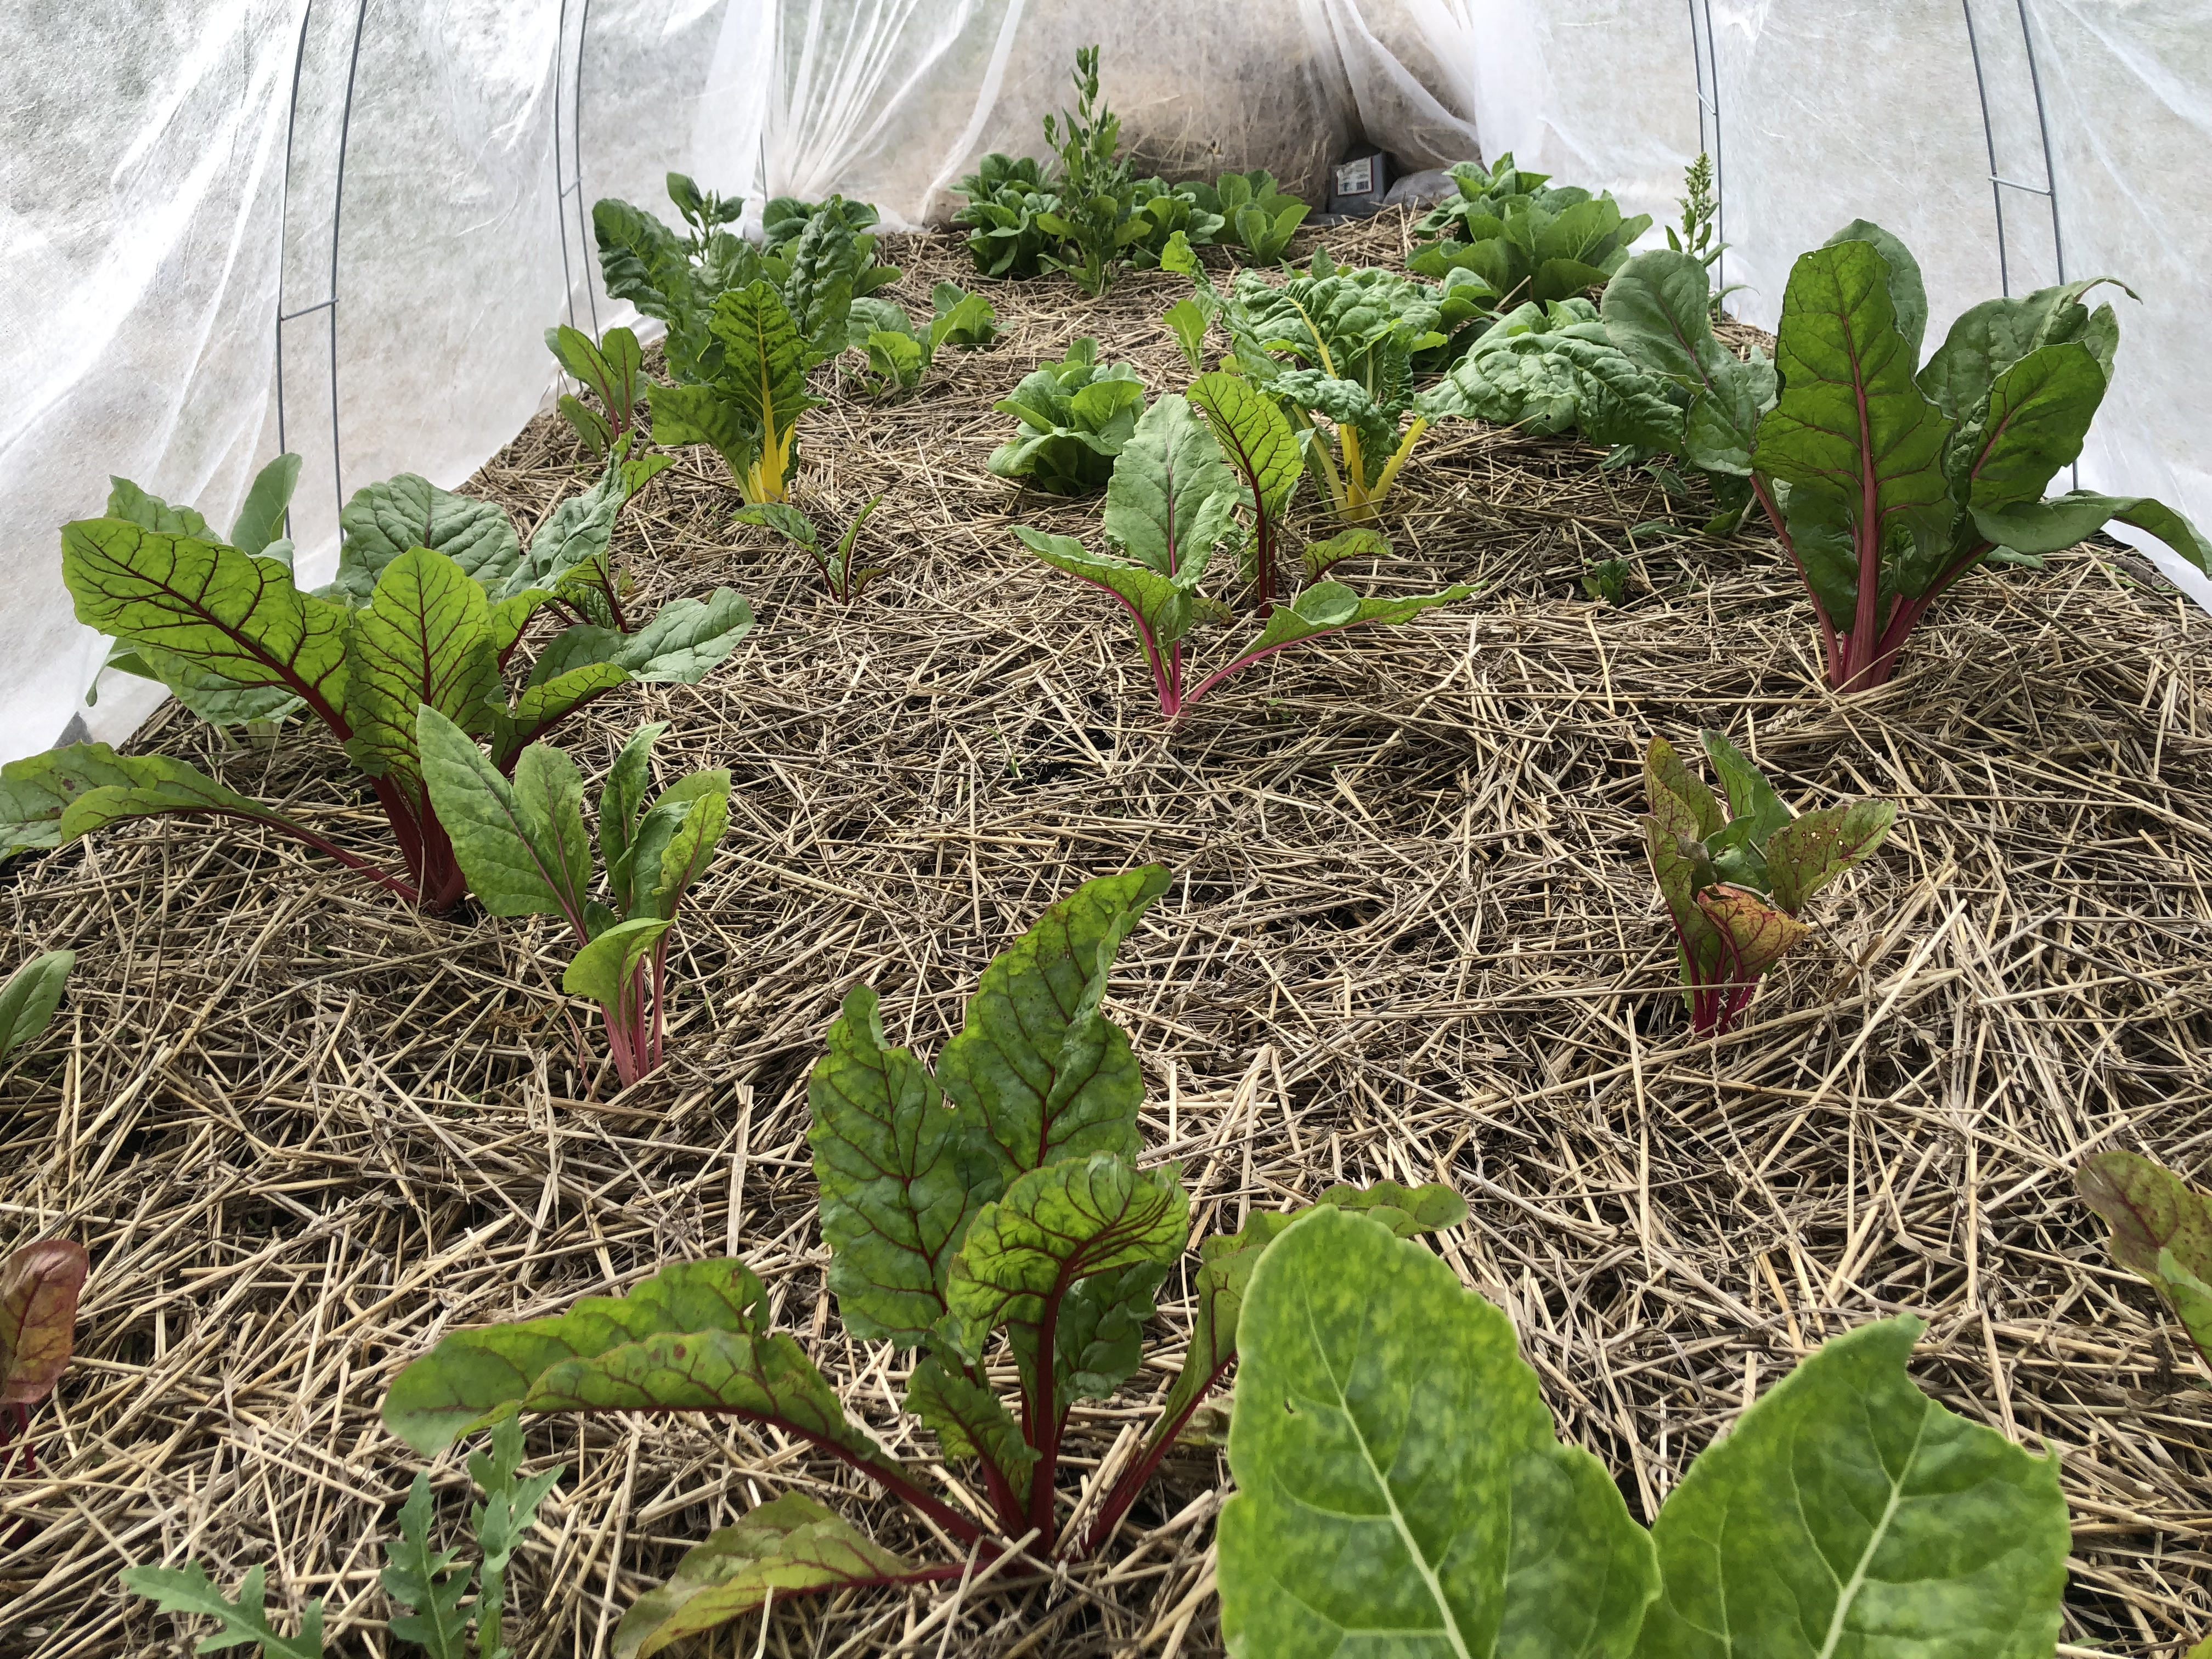 Swiss chard (and spinach bolting in the back) beneath row covers in a garden.